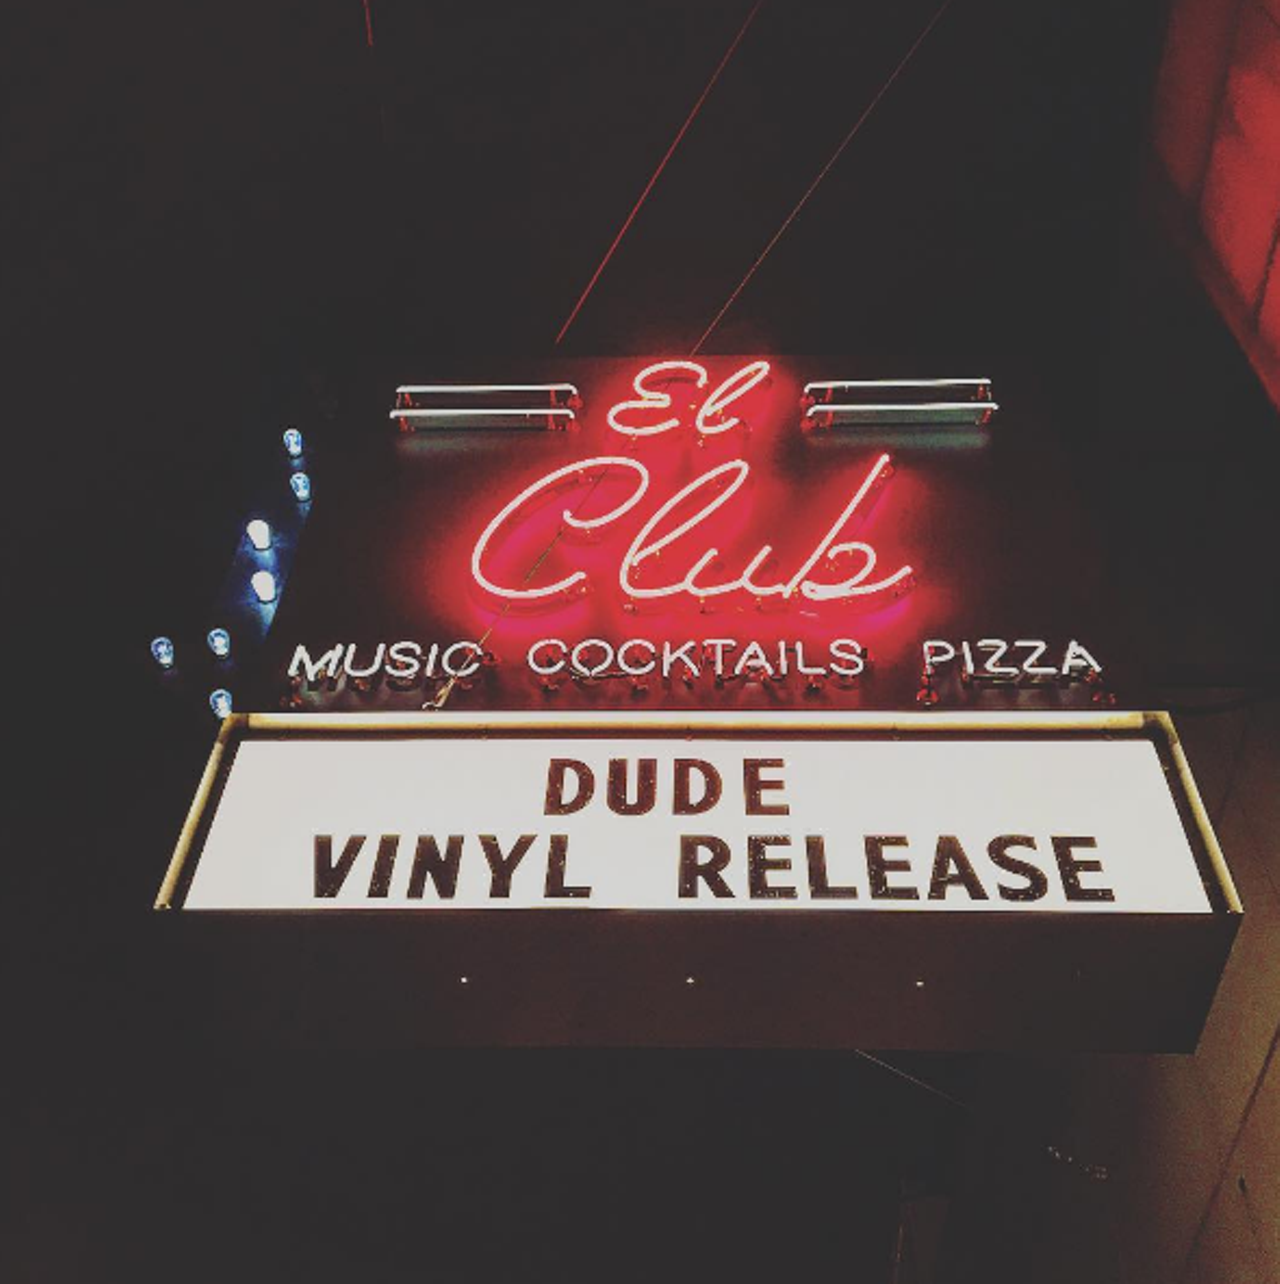 El Club, 4114 Vernor Highway 
With Pepe Z at the pizza helm and a newly launched Michigan Artist Pizza Series, you're bound to find the perfect slice to fit your tastes while you're taking in a live show.
Photo via @tony_muggs